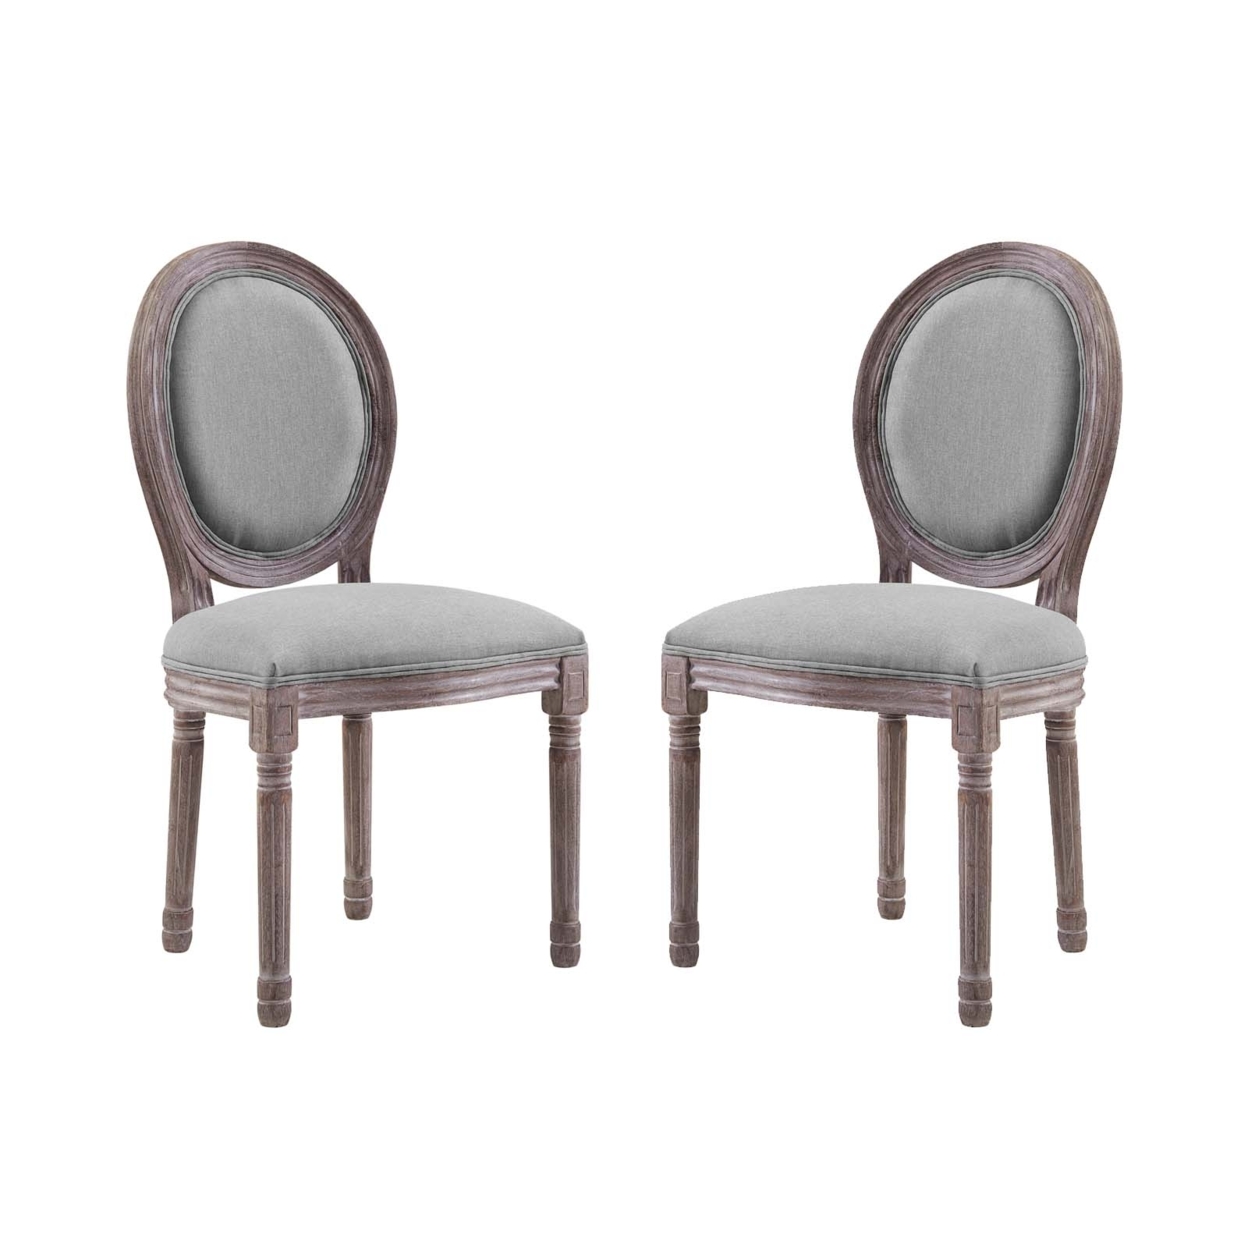 Emanate Dining Side Chair Upholstered Fabric Set Of 2,Light Gray